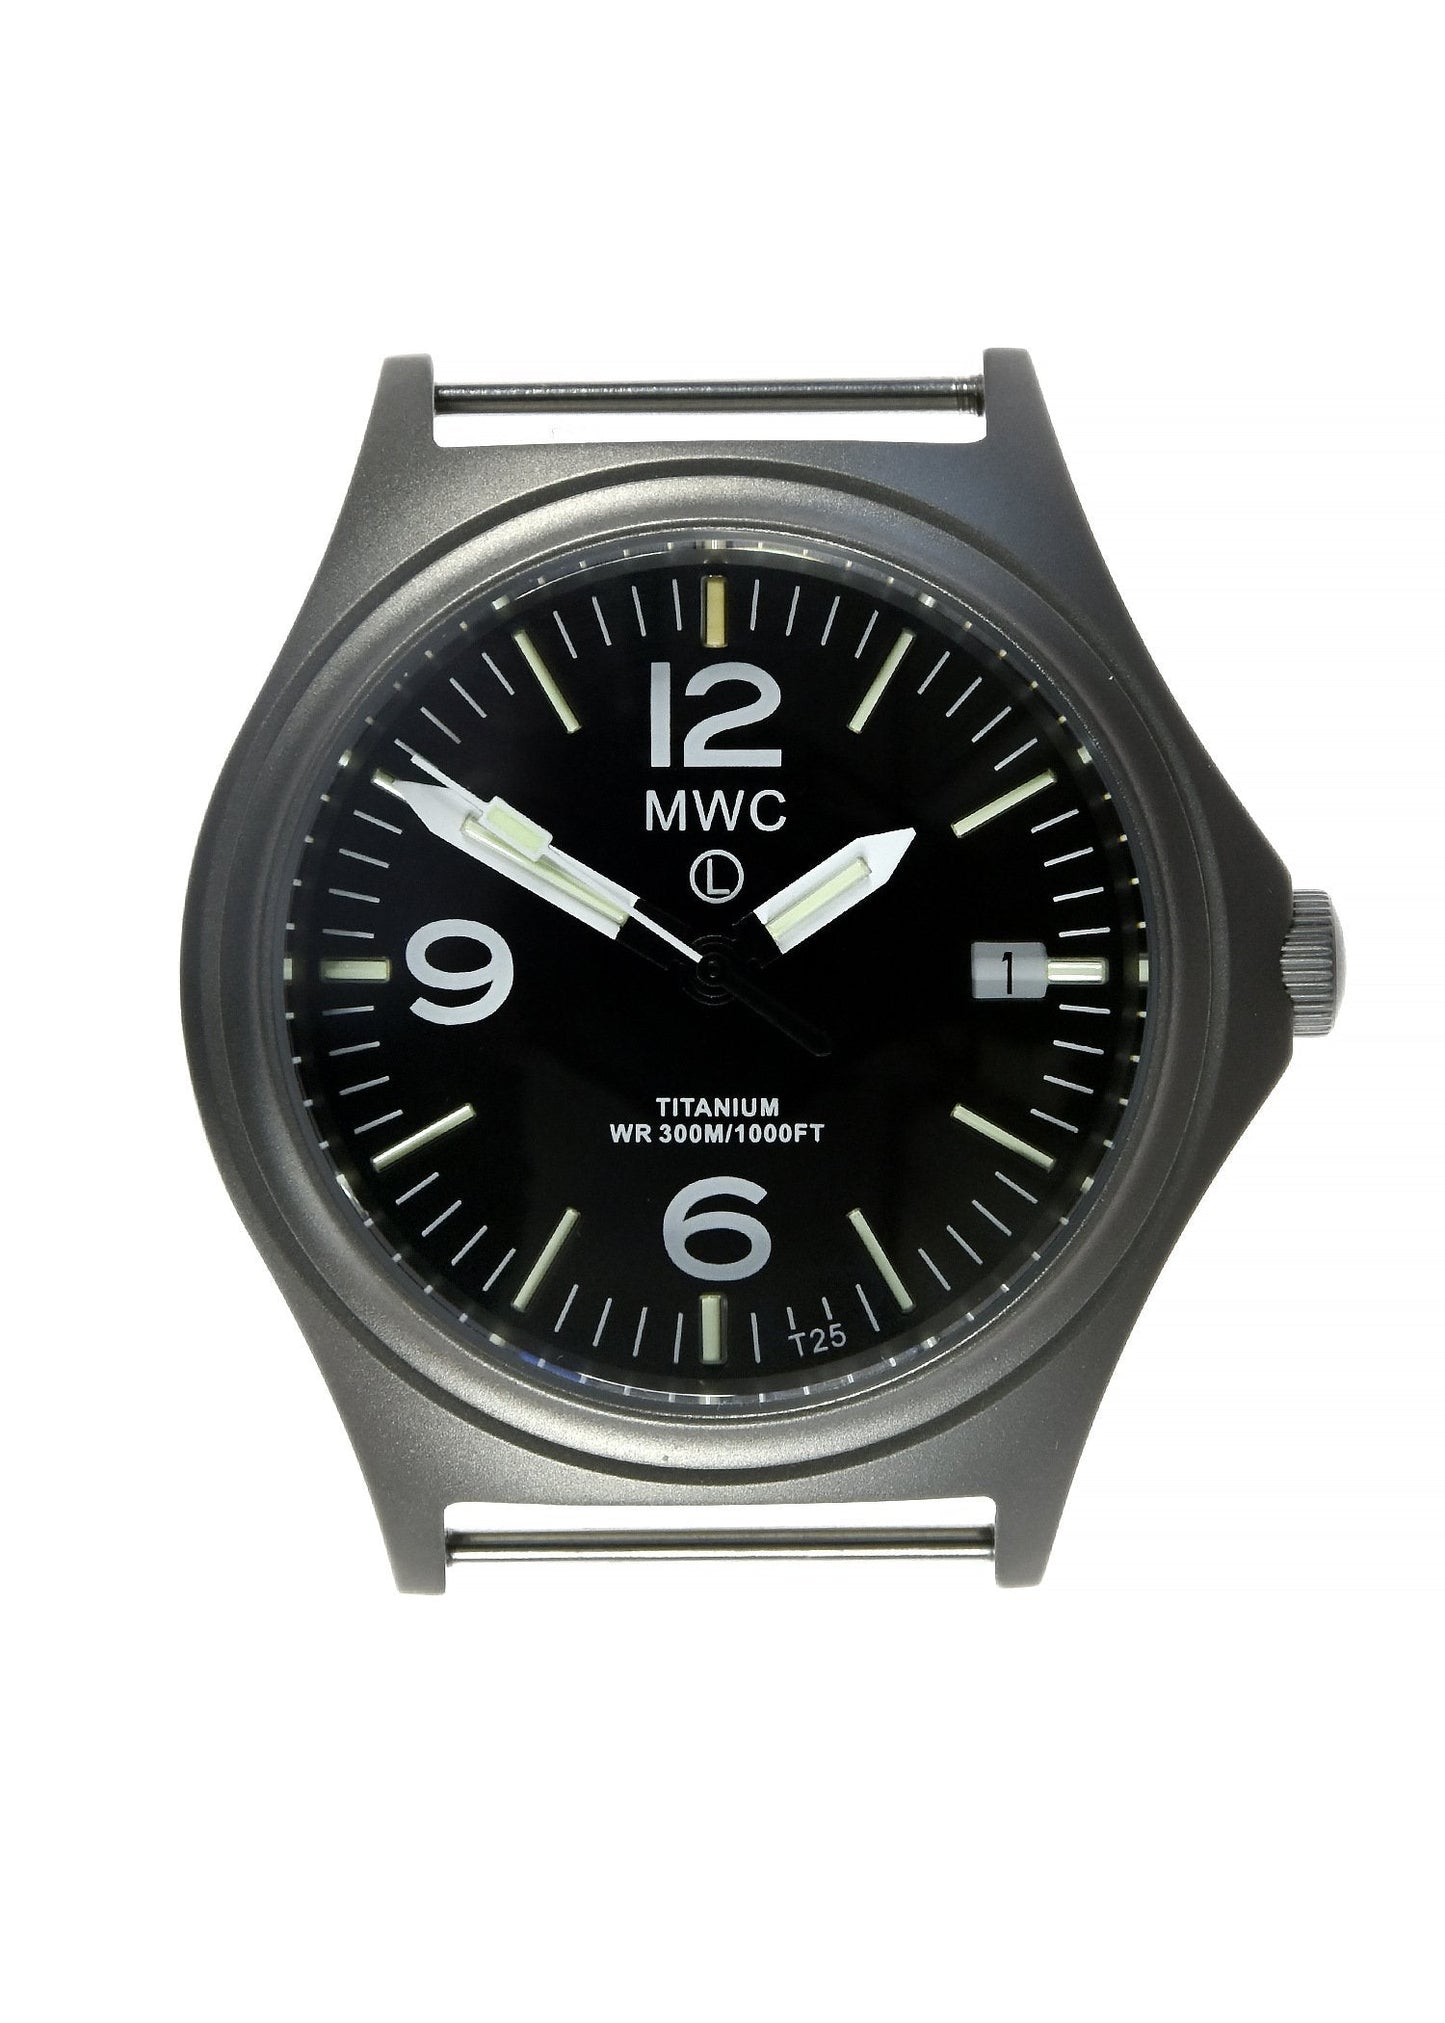 MWC 45th Anniversary Limited Edition Titanium Military Watch with Tritium GTLS, 300m Water Resistant, 10 Year Battery Life and Sapphire Crystal